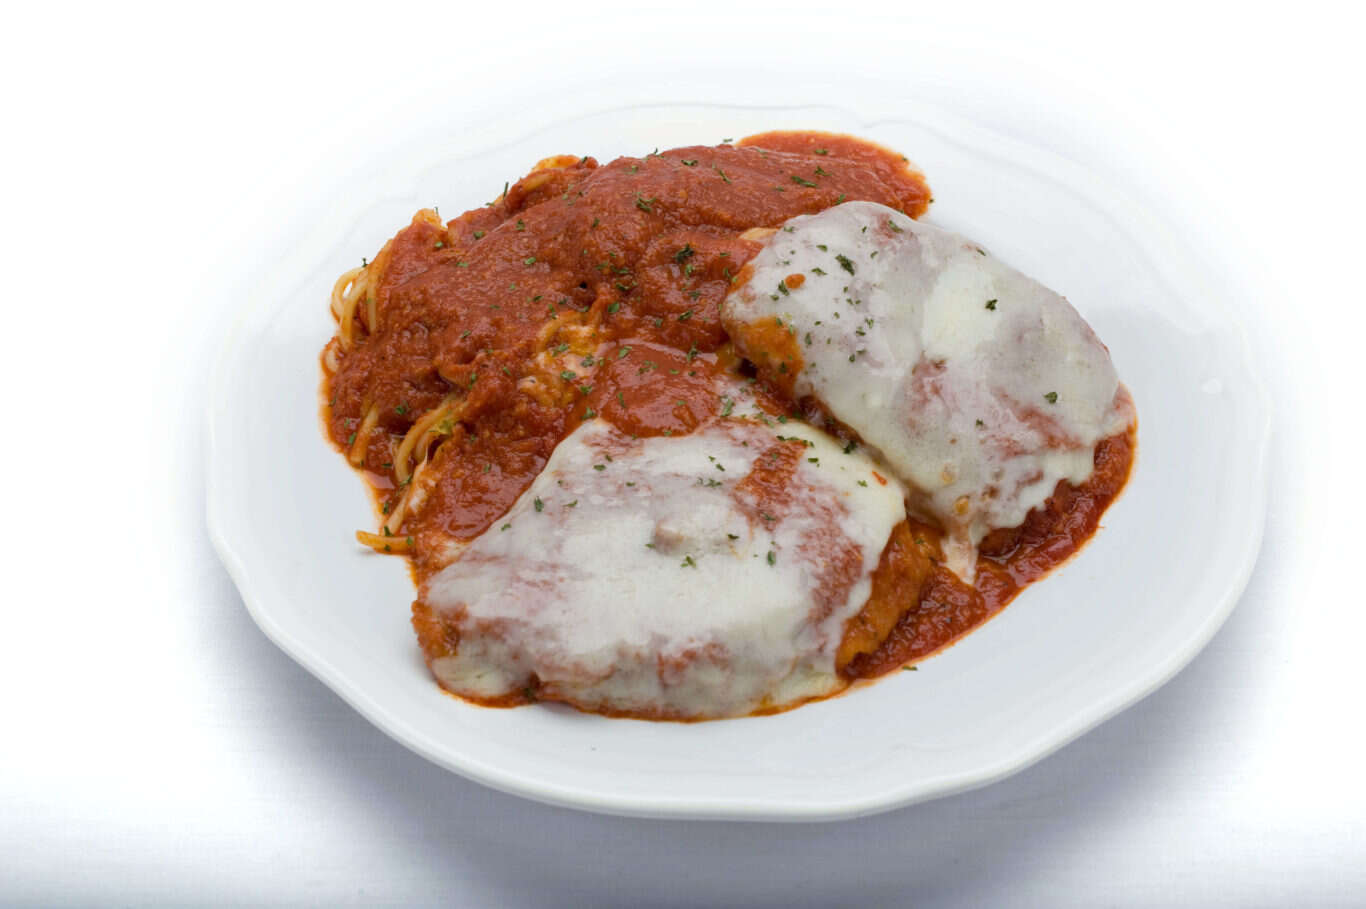 Plate of Chicken Parm meatballs and sauce on white surface. Delicious Italian dish from Genova's To Go.